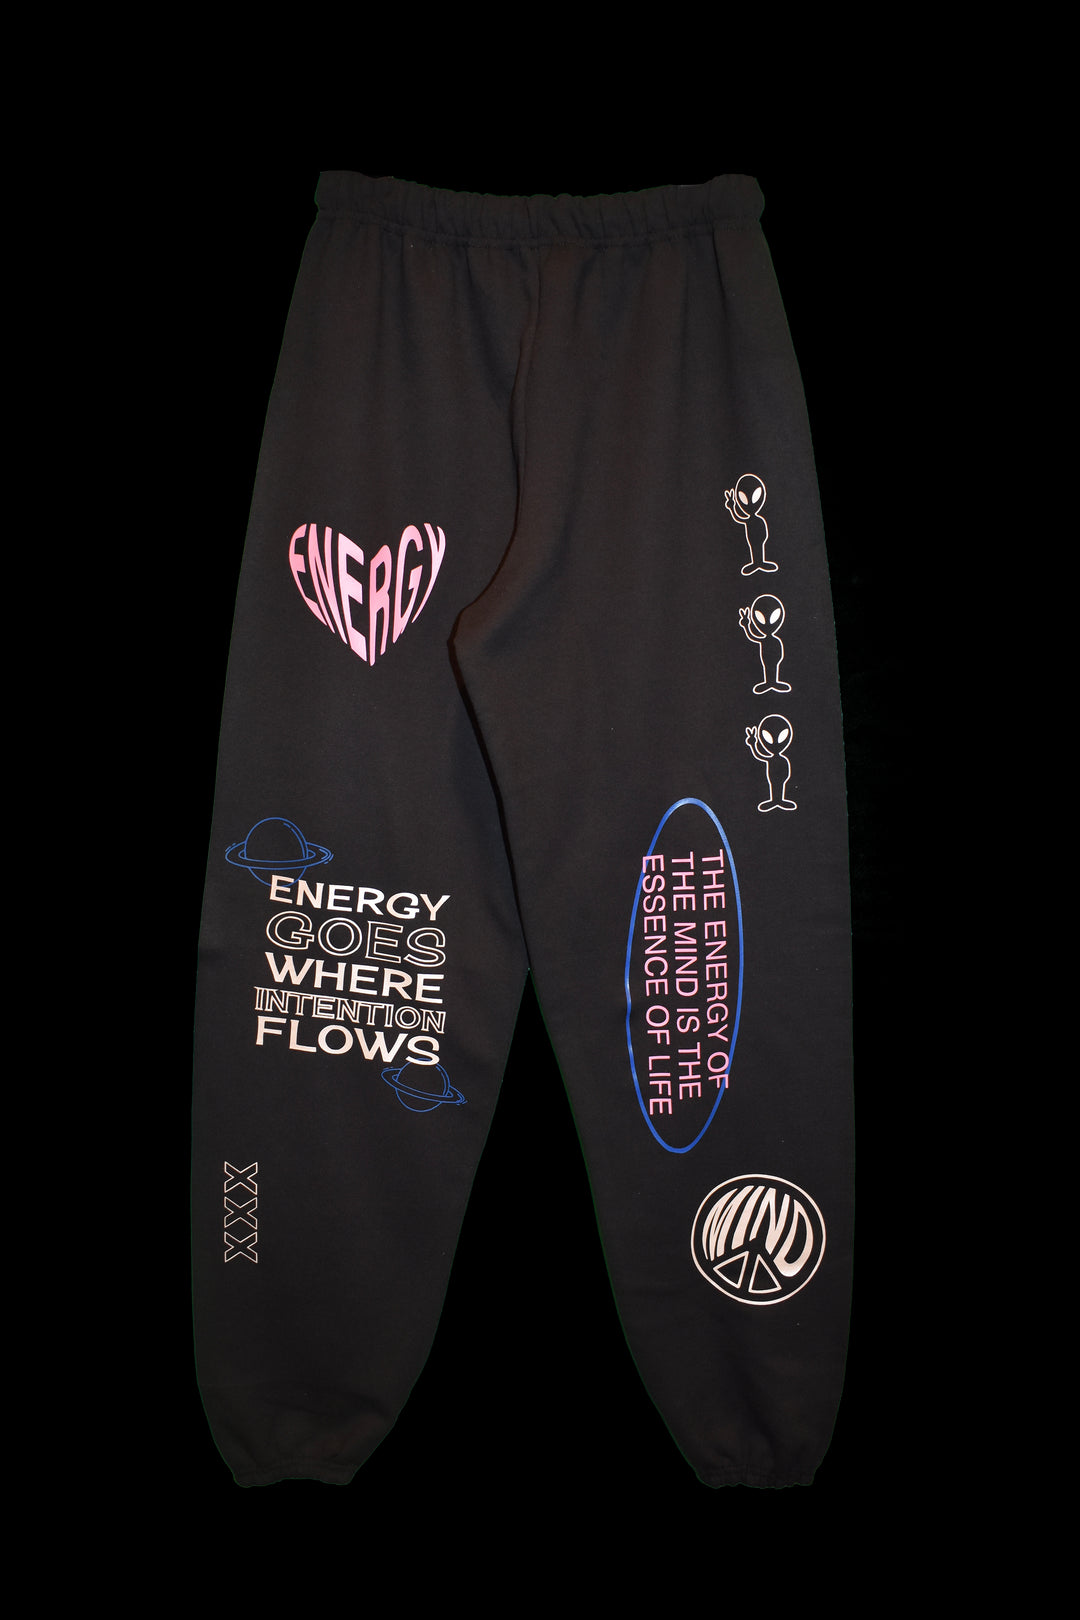 black energy sweatpants. Energy goes where intention flows. The energy of the mind is the essence of life.